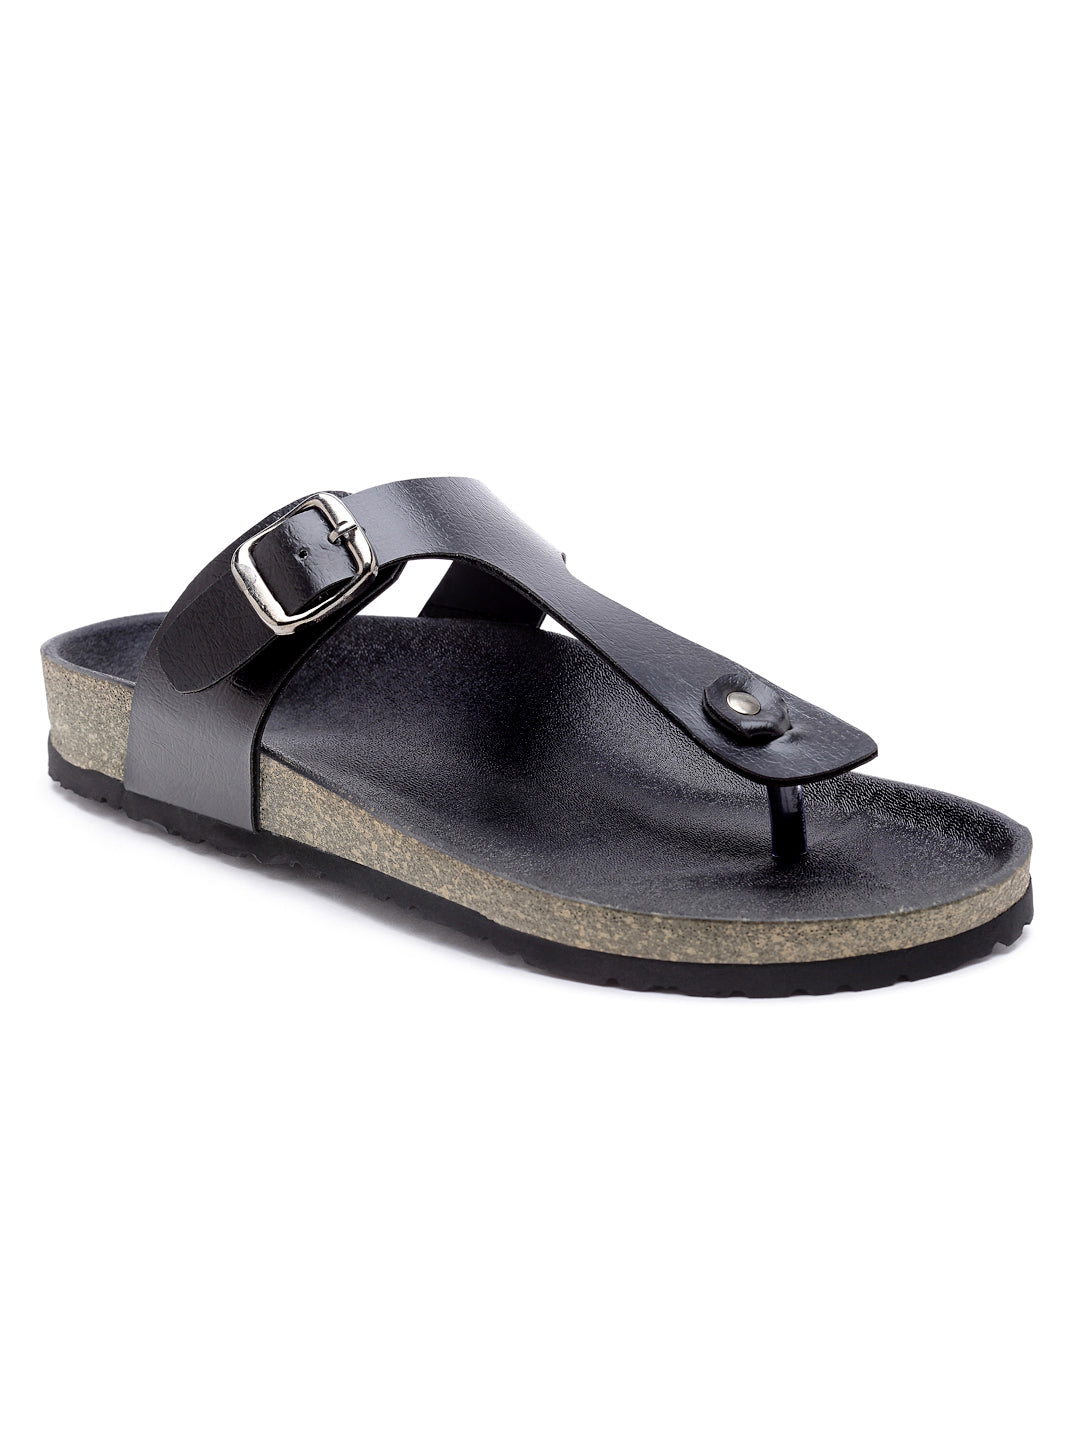 Women's Outdoor Stylish Black Synthetic Leather Casual Sandal